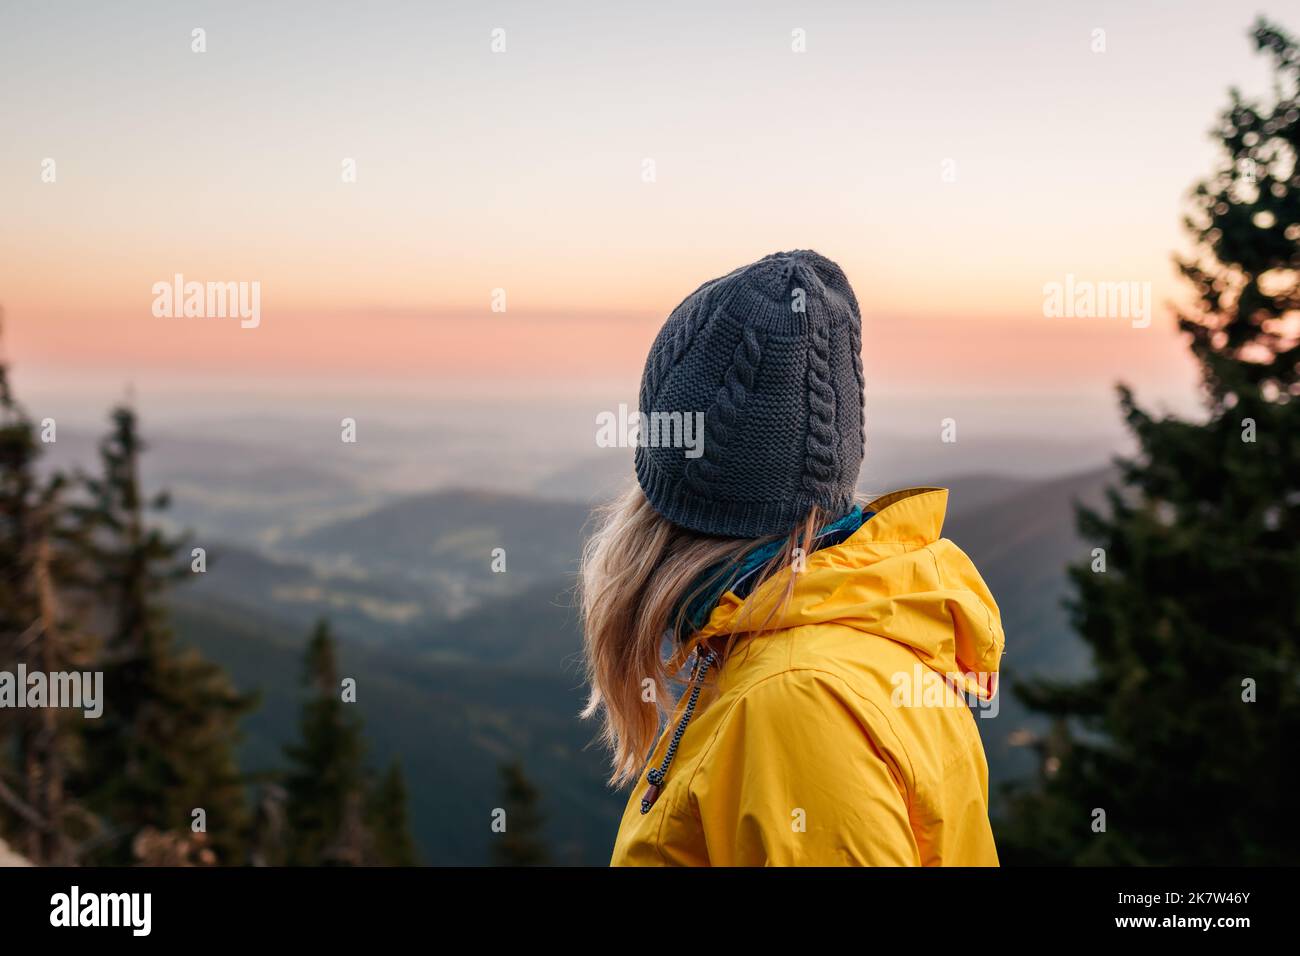 Woman with knit hat and yellow jacket looking at mountain range during sunset. Relaxation during hiking in mountains Stock Photo